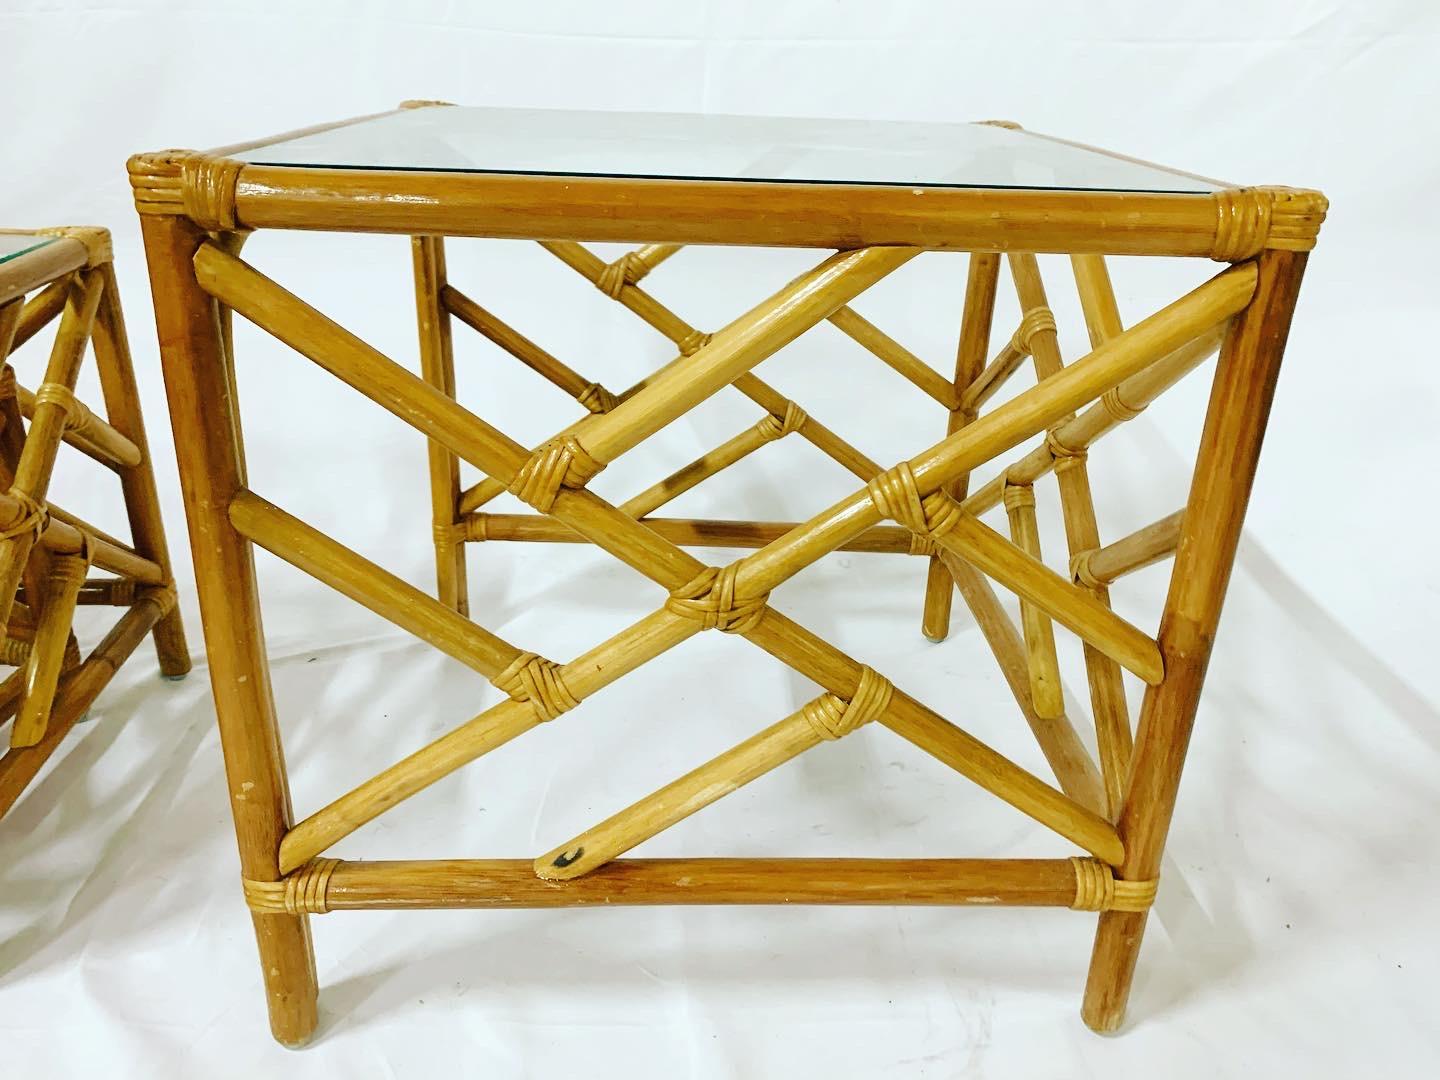 Chippendale Bamboo Rattan Nesting Tables – Set of 3 4